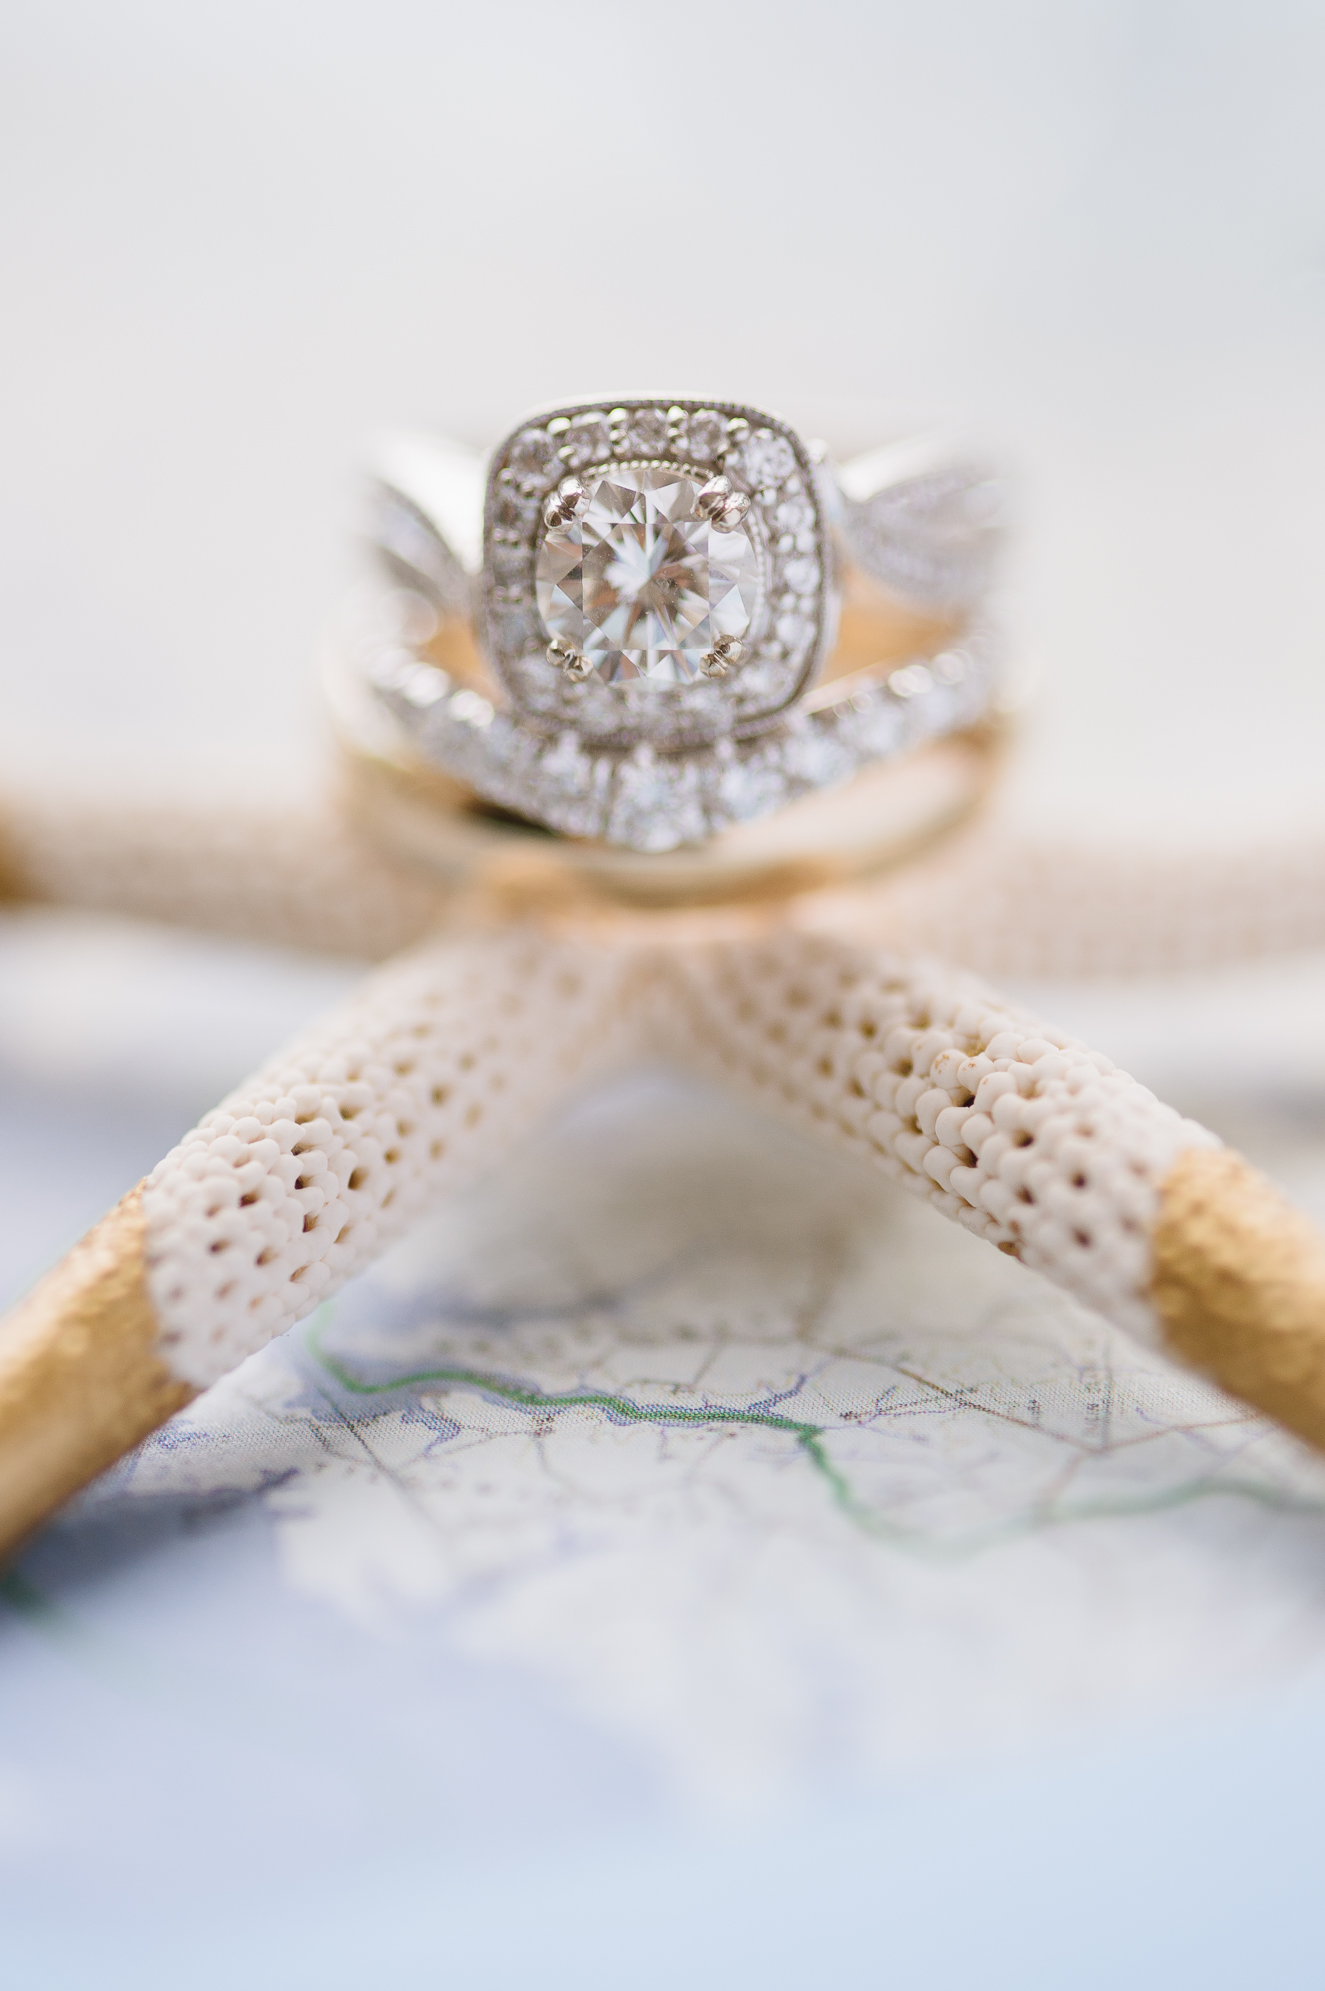 Starfish Engagement Ring Detail Pictures | Round Brilliant Halo Diamond Ring